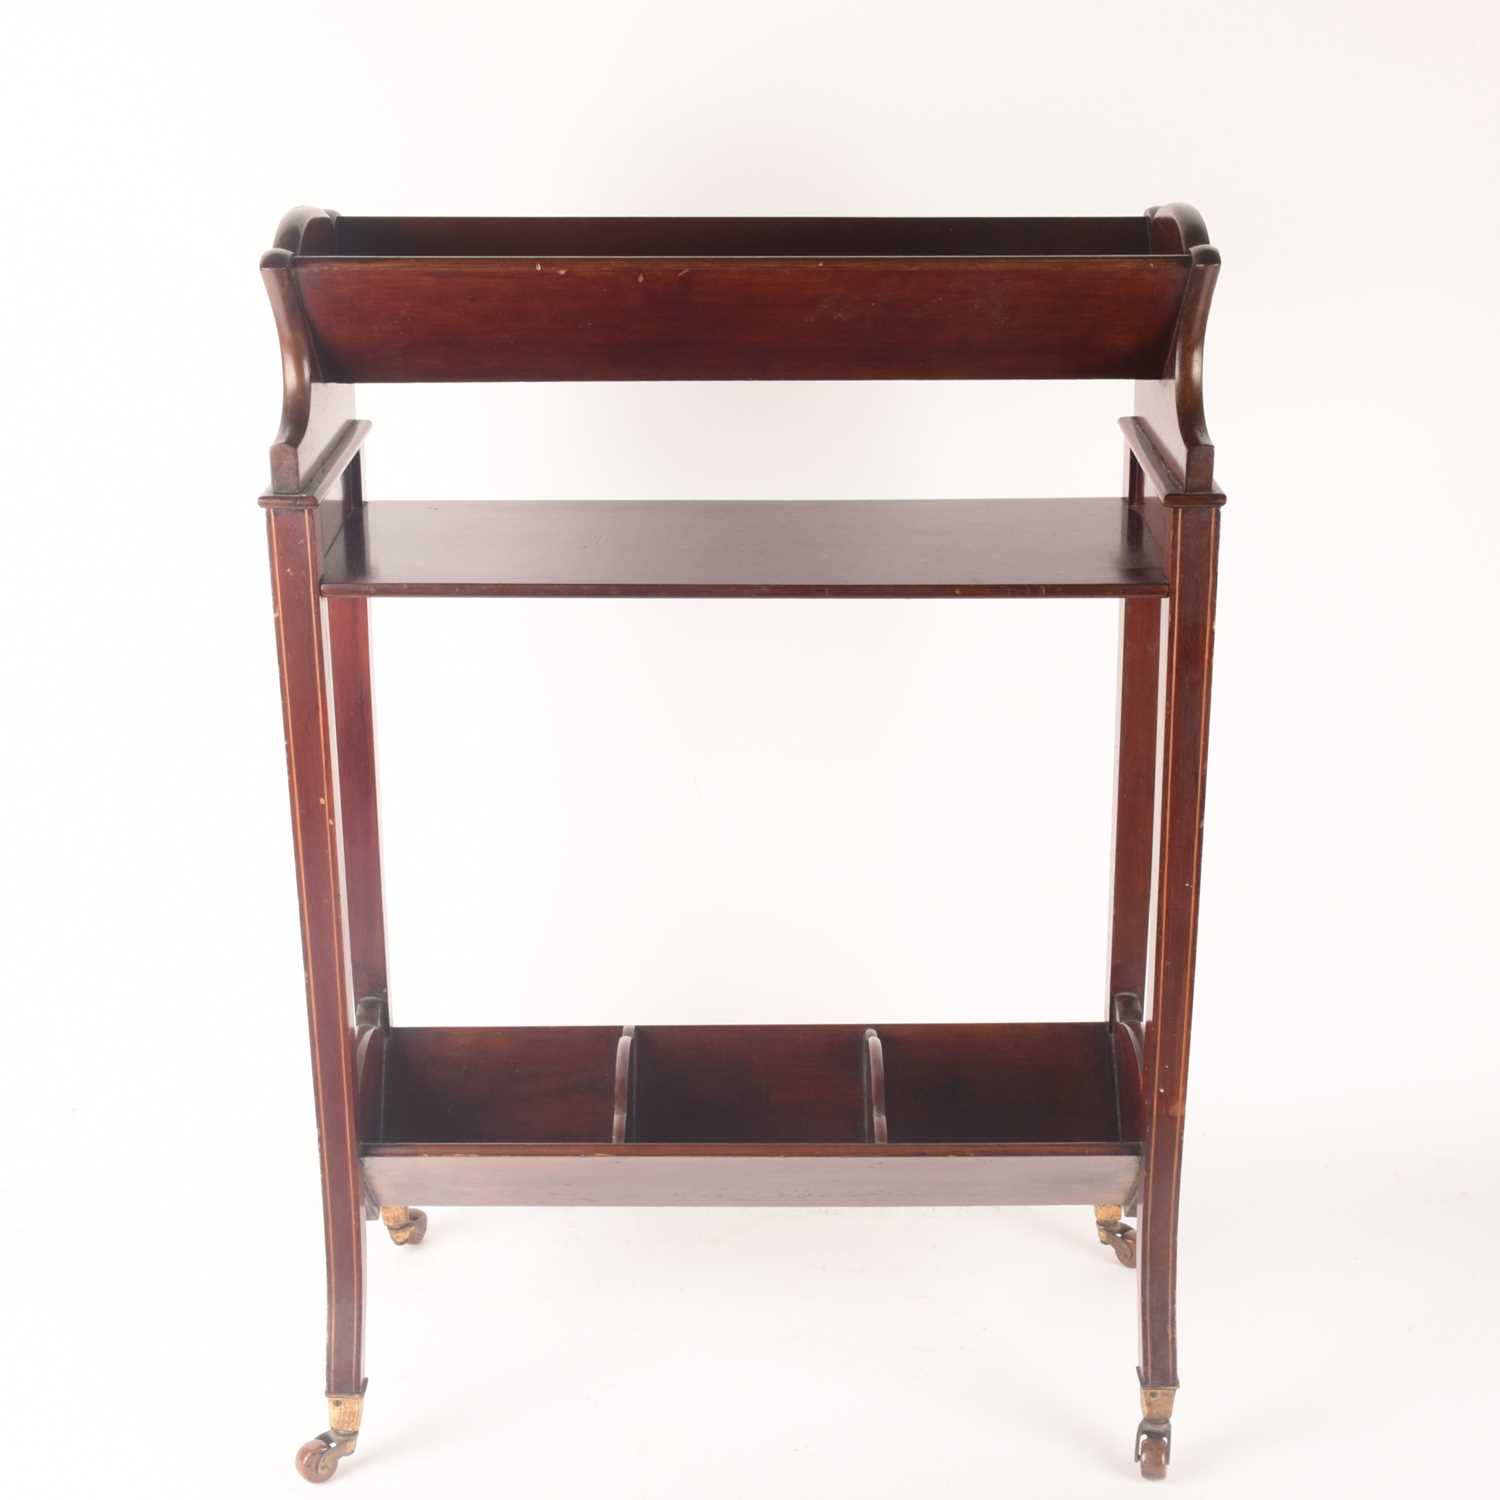 An Edwardian inlaid mahogany three-shelved book trough supported on splayed feet with brass cap cast - Image 2 of 11